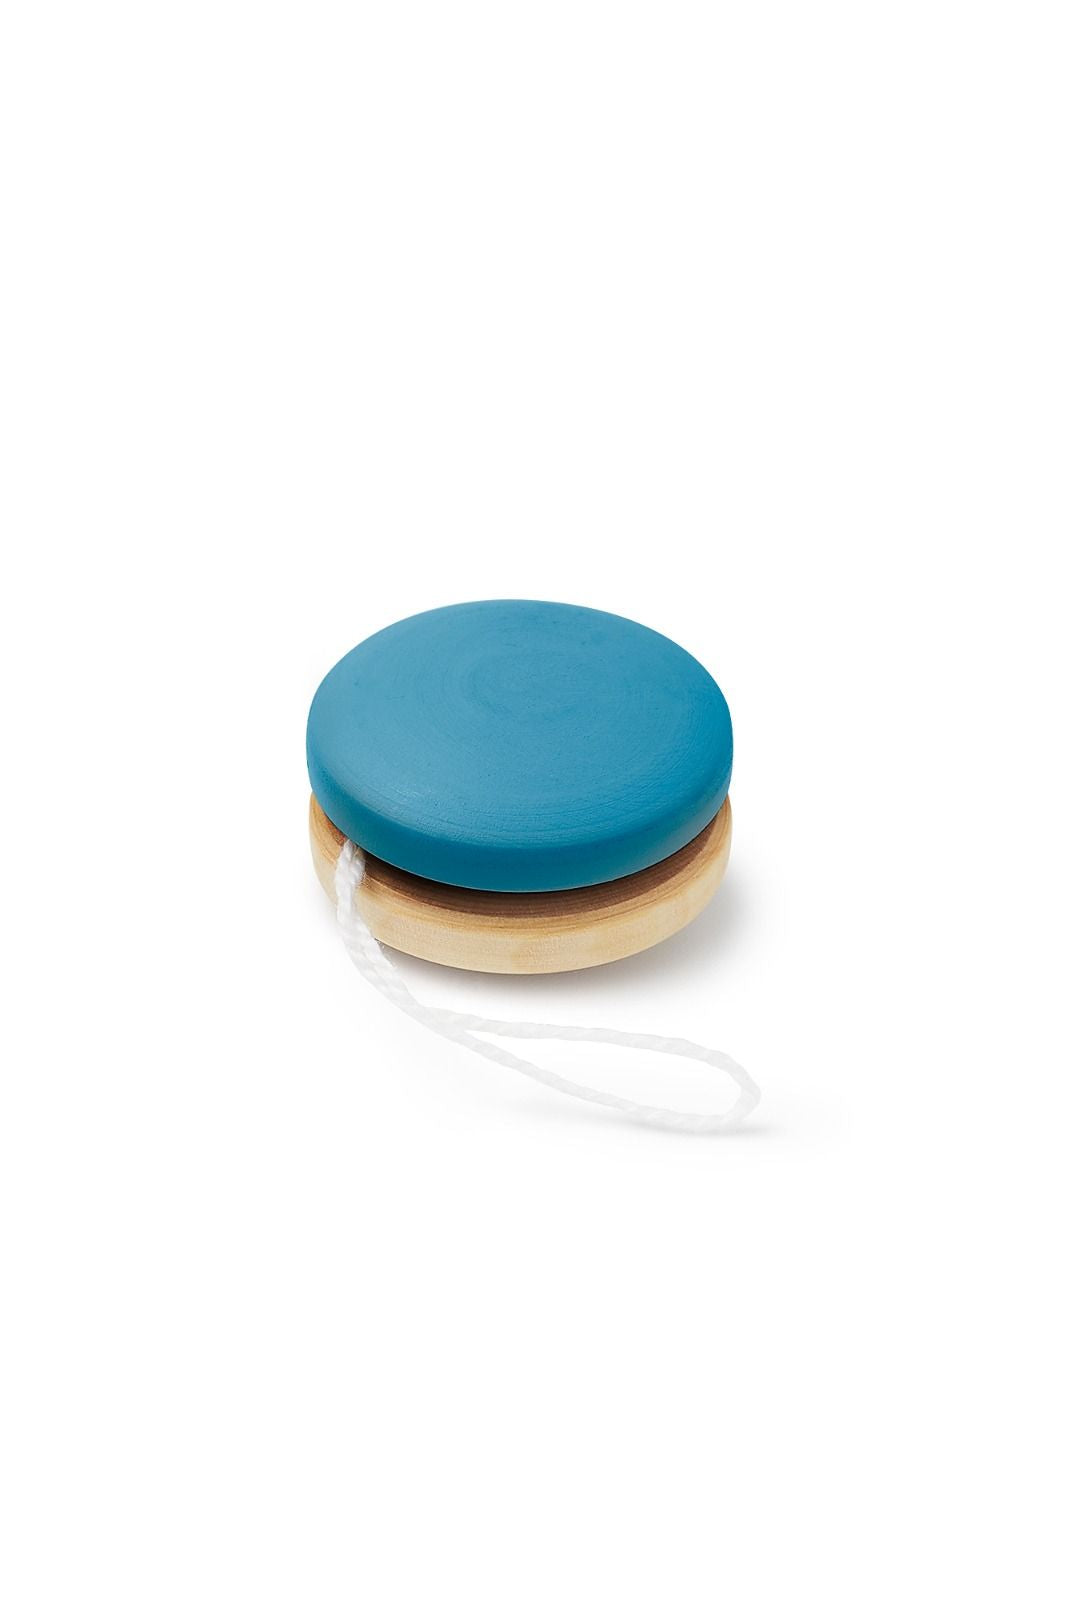 Mini Wooden YoYo - Blue - Eco-friendly and entertaining toy for sustainable and nostalgic play.